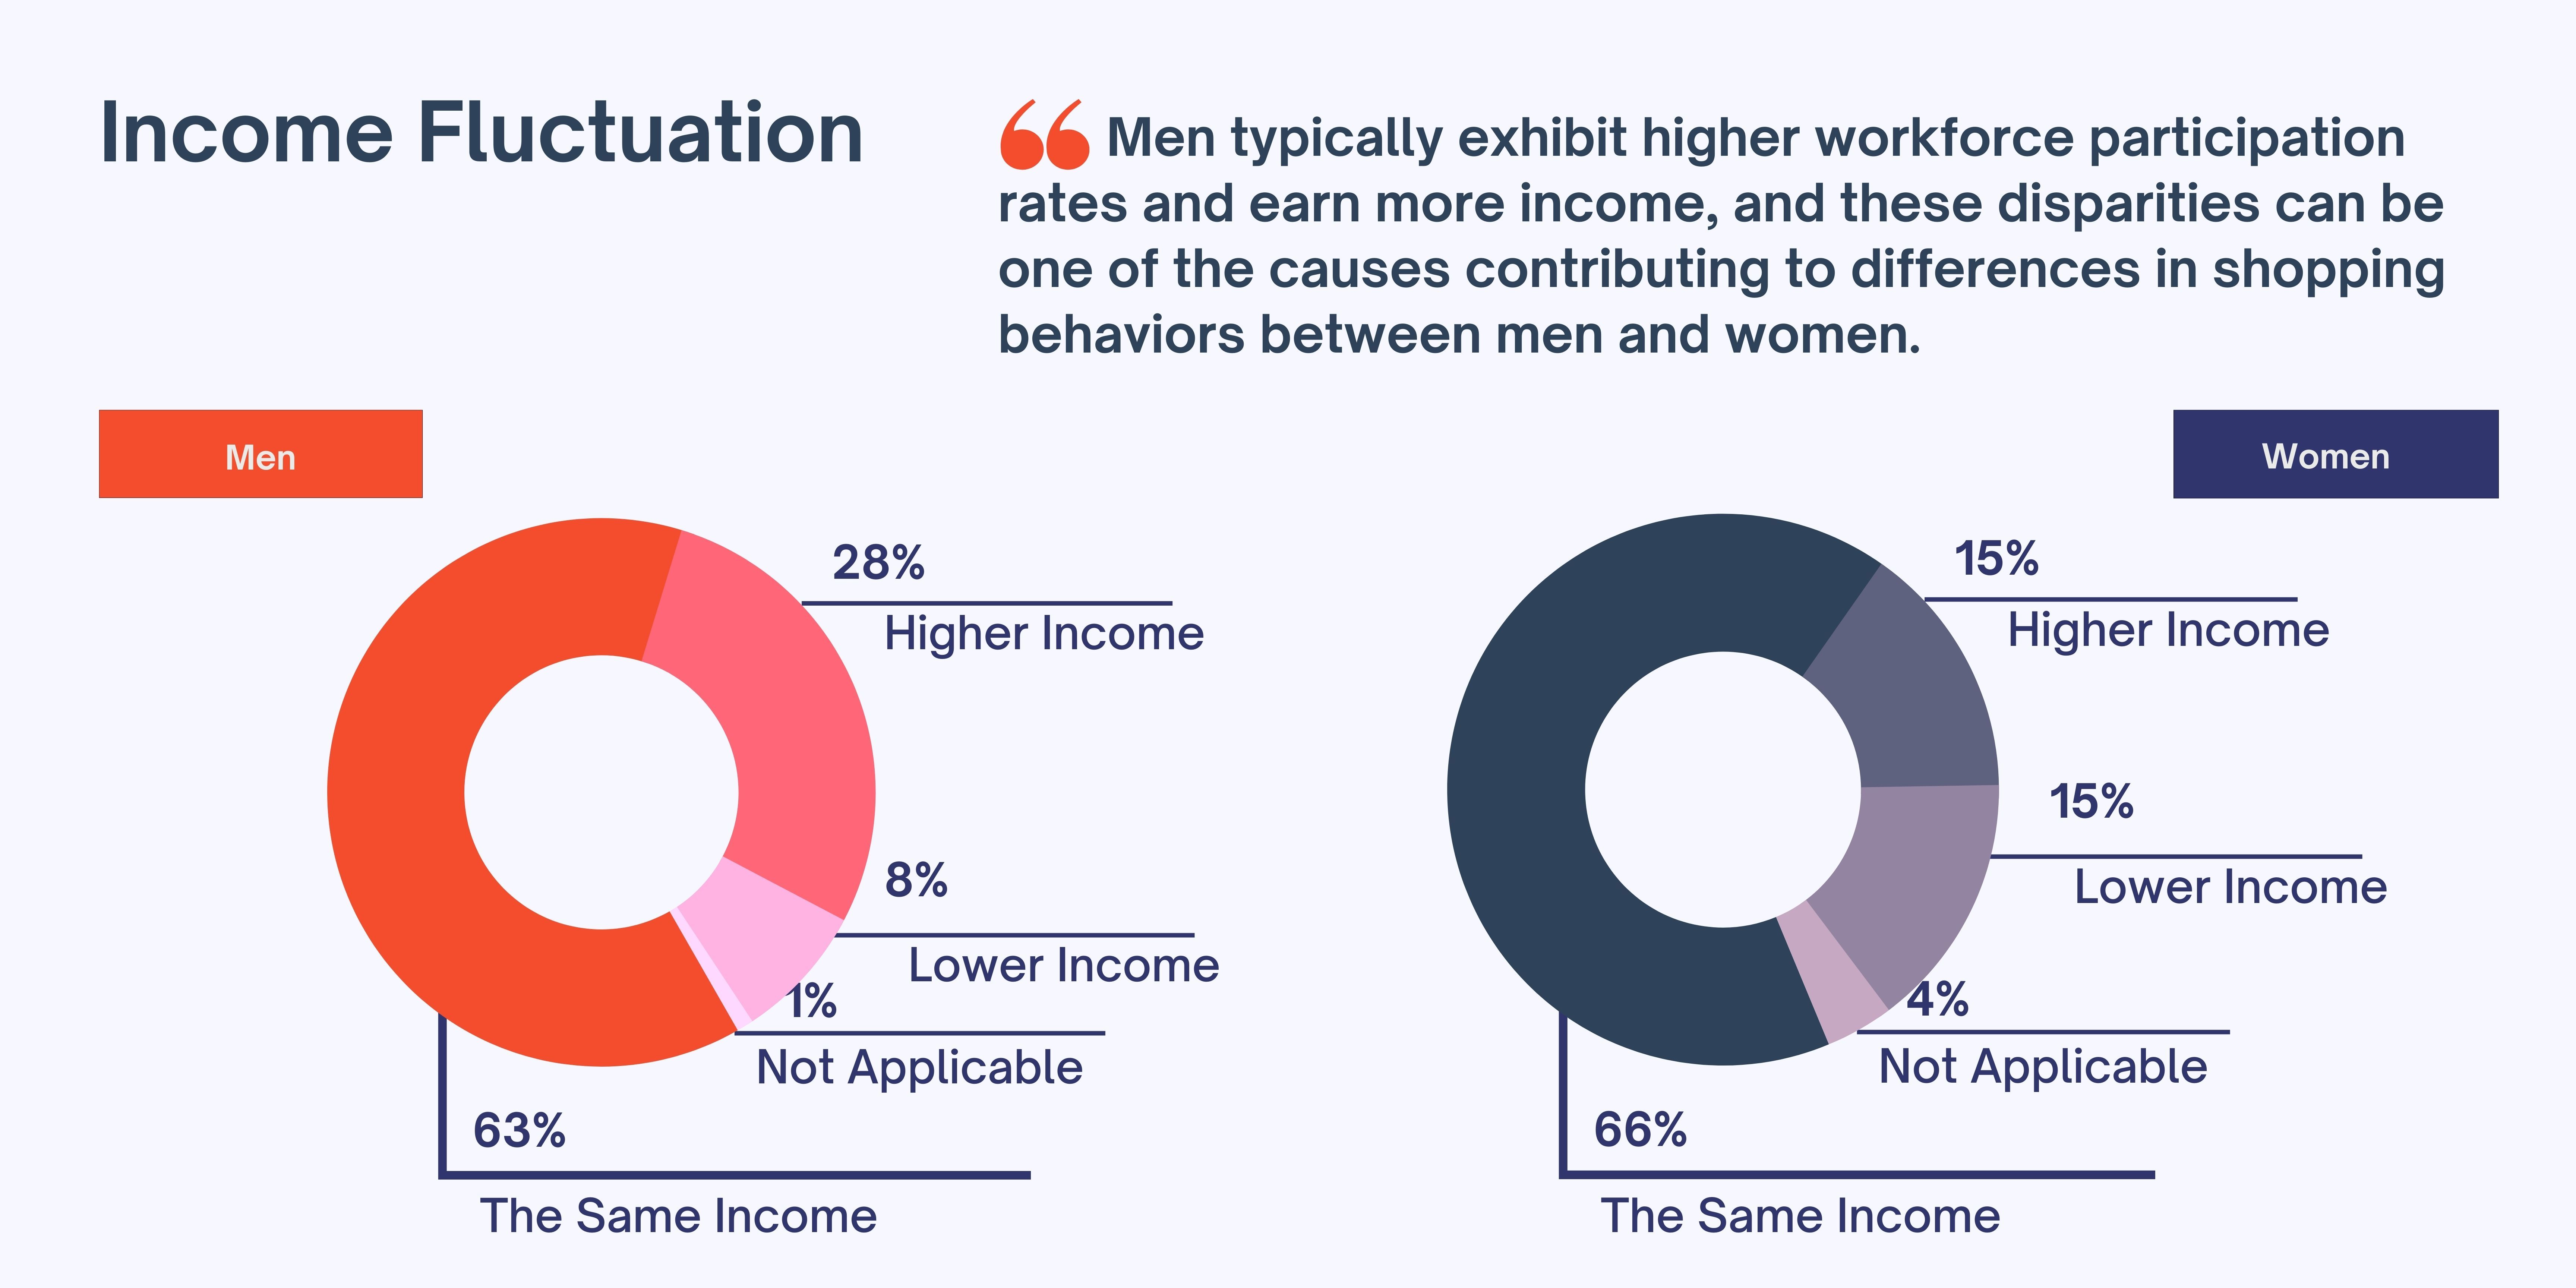 difference in shopping behaviors between men and women, income fluctuation, more income